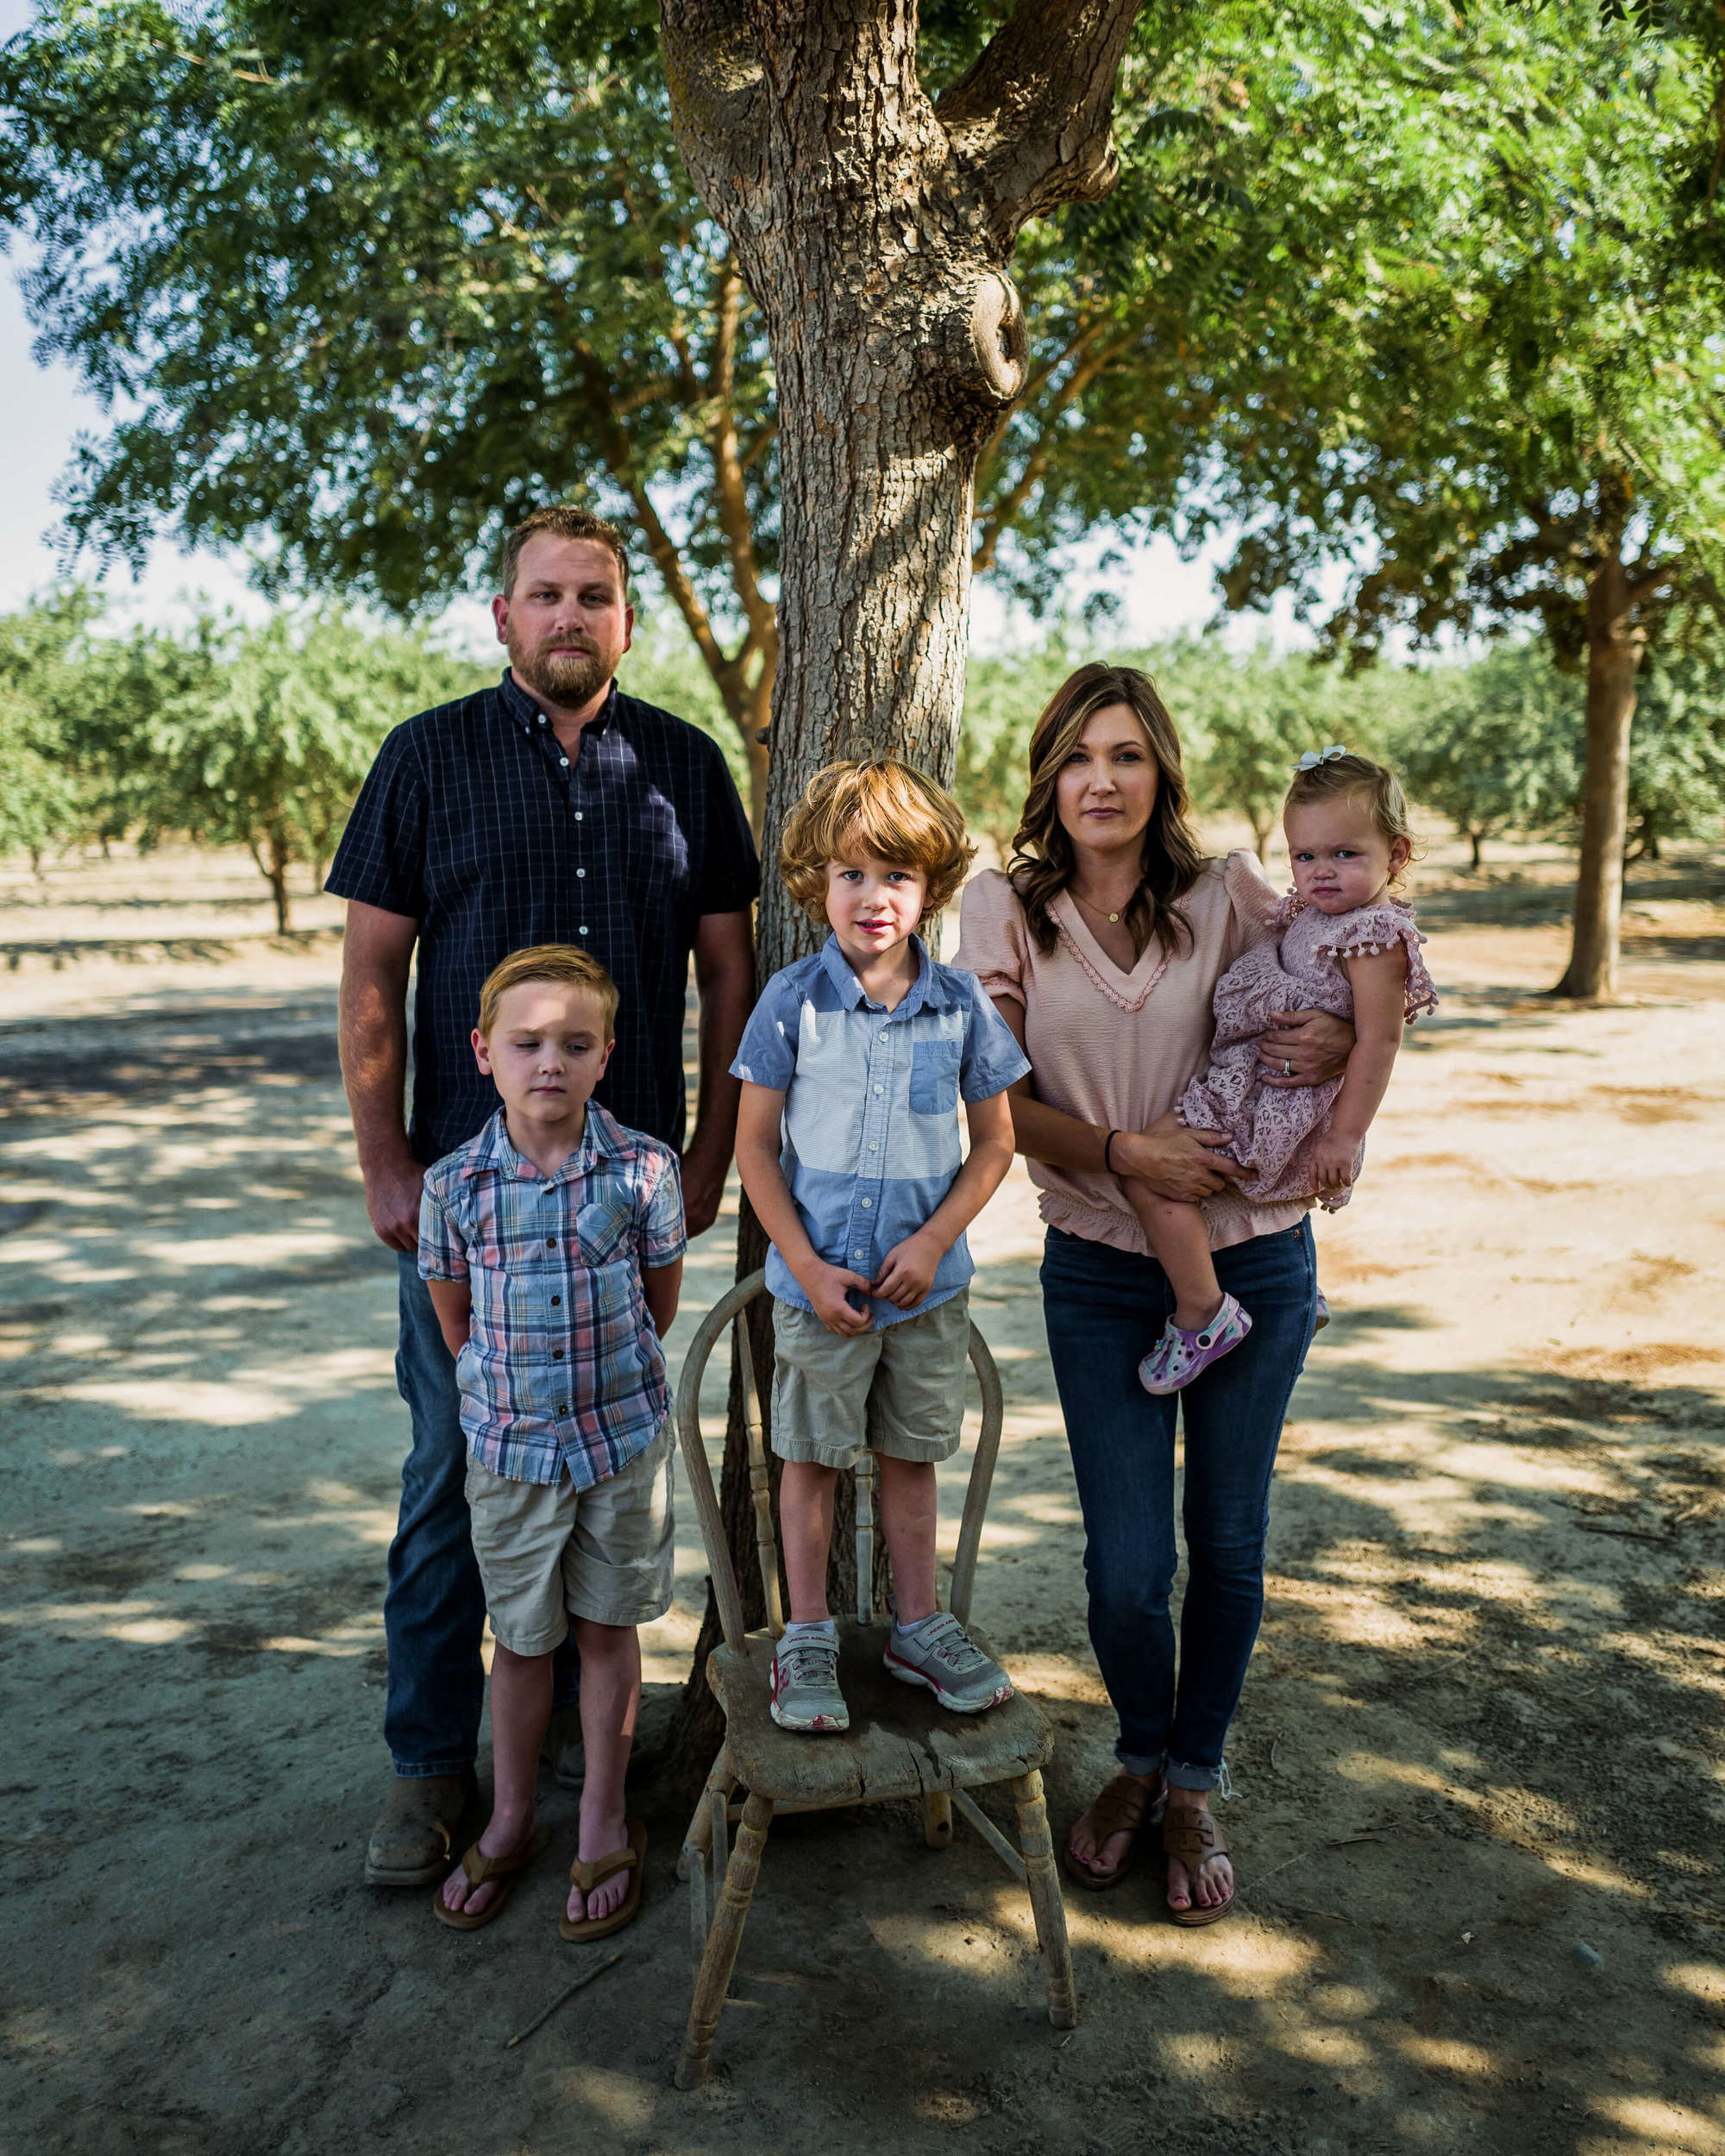 Hanford farmer Robert Smith, his wife Courtney and their three children watertitans november 2021